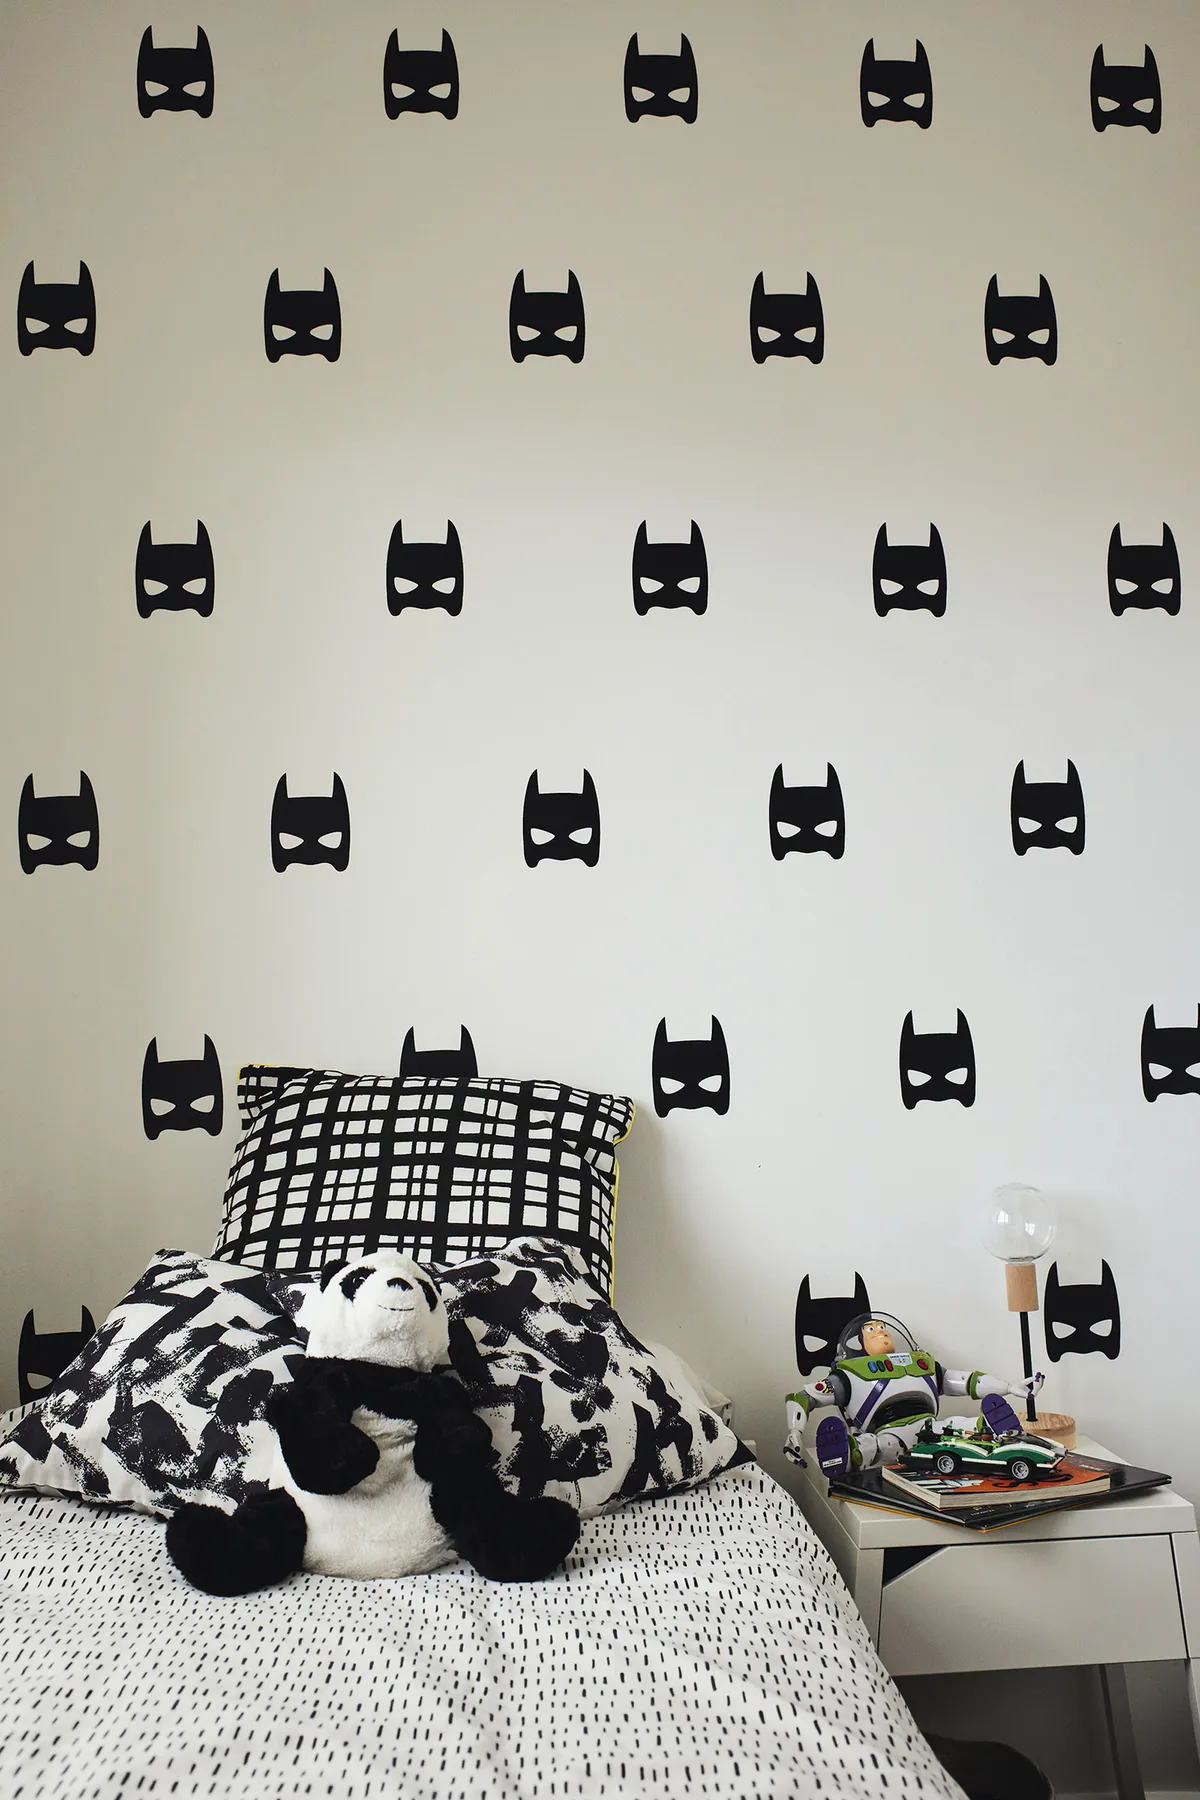 ‘Oisin loves Batman and Lego so we carried this theme into his room. We found the batman vinyl stickers on Etsy and picked up some black and white bedding in H&M Home’